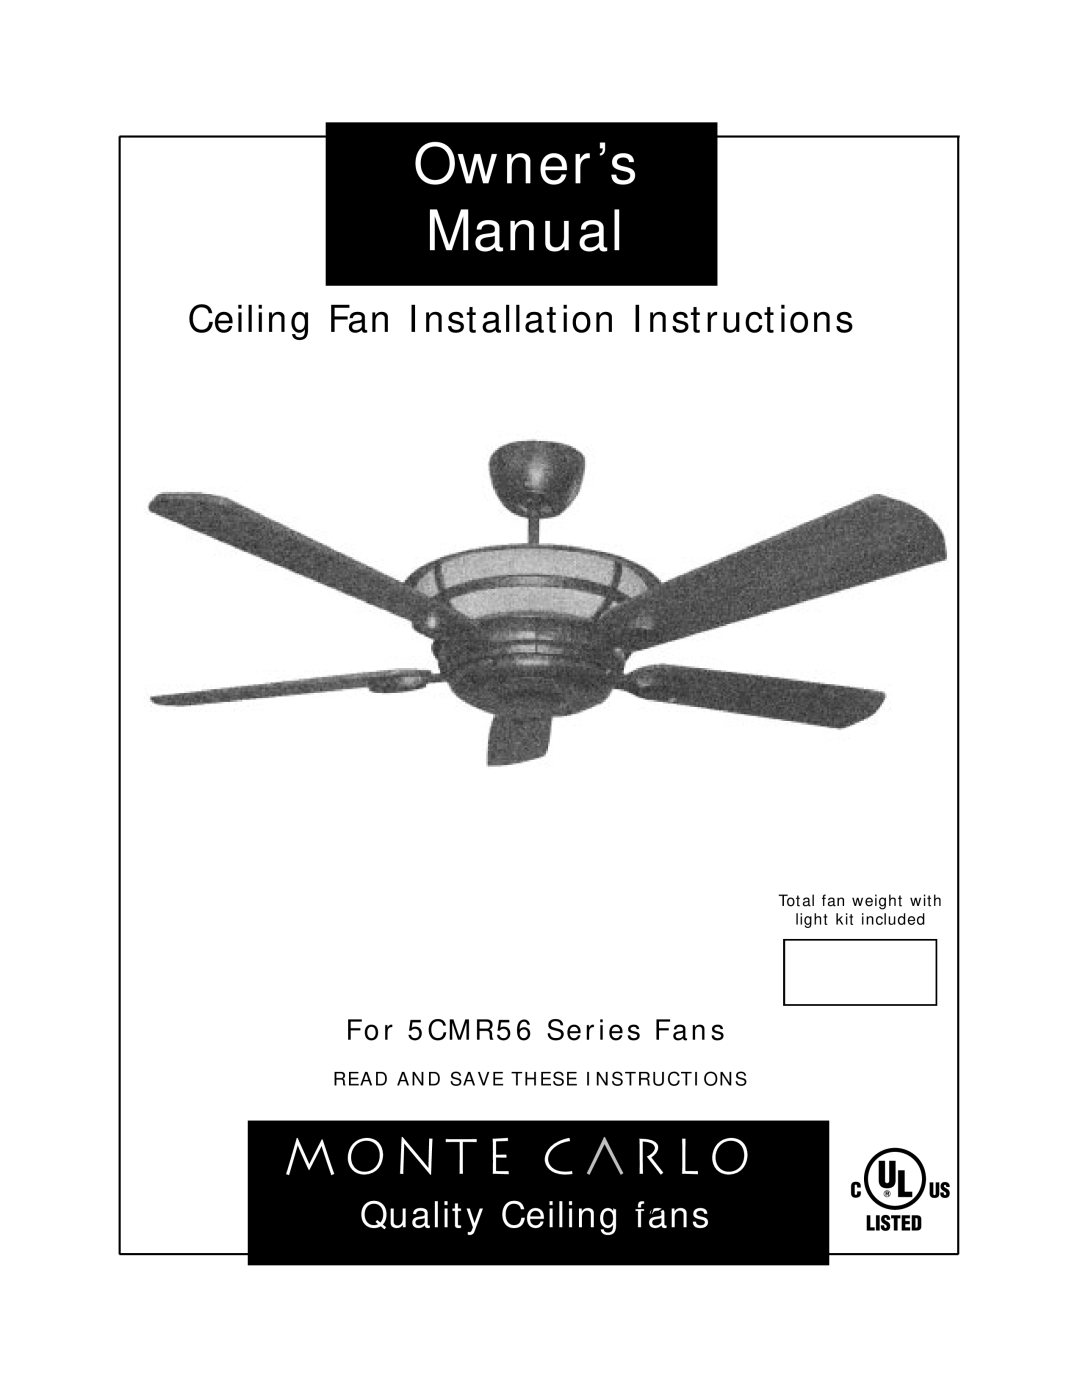 Monte Carlo Fan Company 5CMR56 owner manual Ceiling Fan Installation Instructions, Quality Ceiling fans 